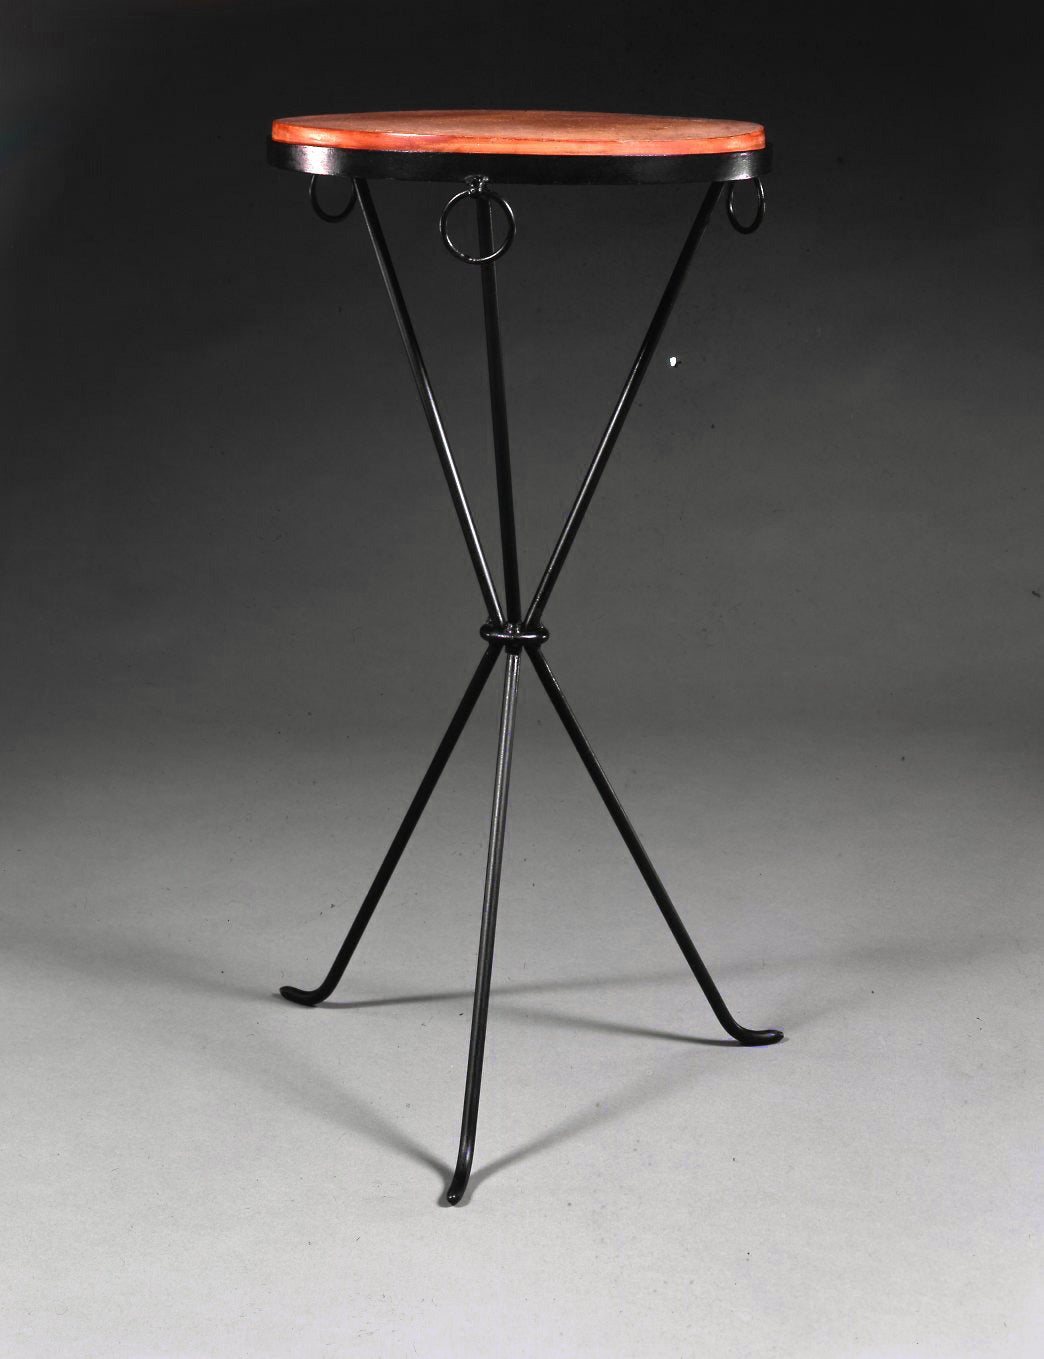 Black patinated wrought iron pedestal table with tripod feet.
The top ornamented with three rings receives a terracotta plate.

Bibliography: Jean Michel Frank, Le´oplod D. Sanchez, Ed du Regard, 1997, pp. 146,199 et 208.

Certificate of